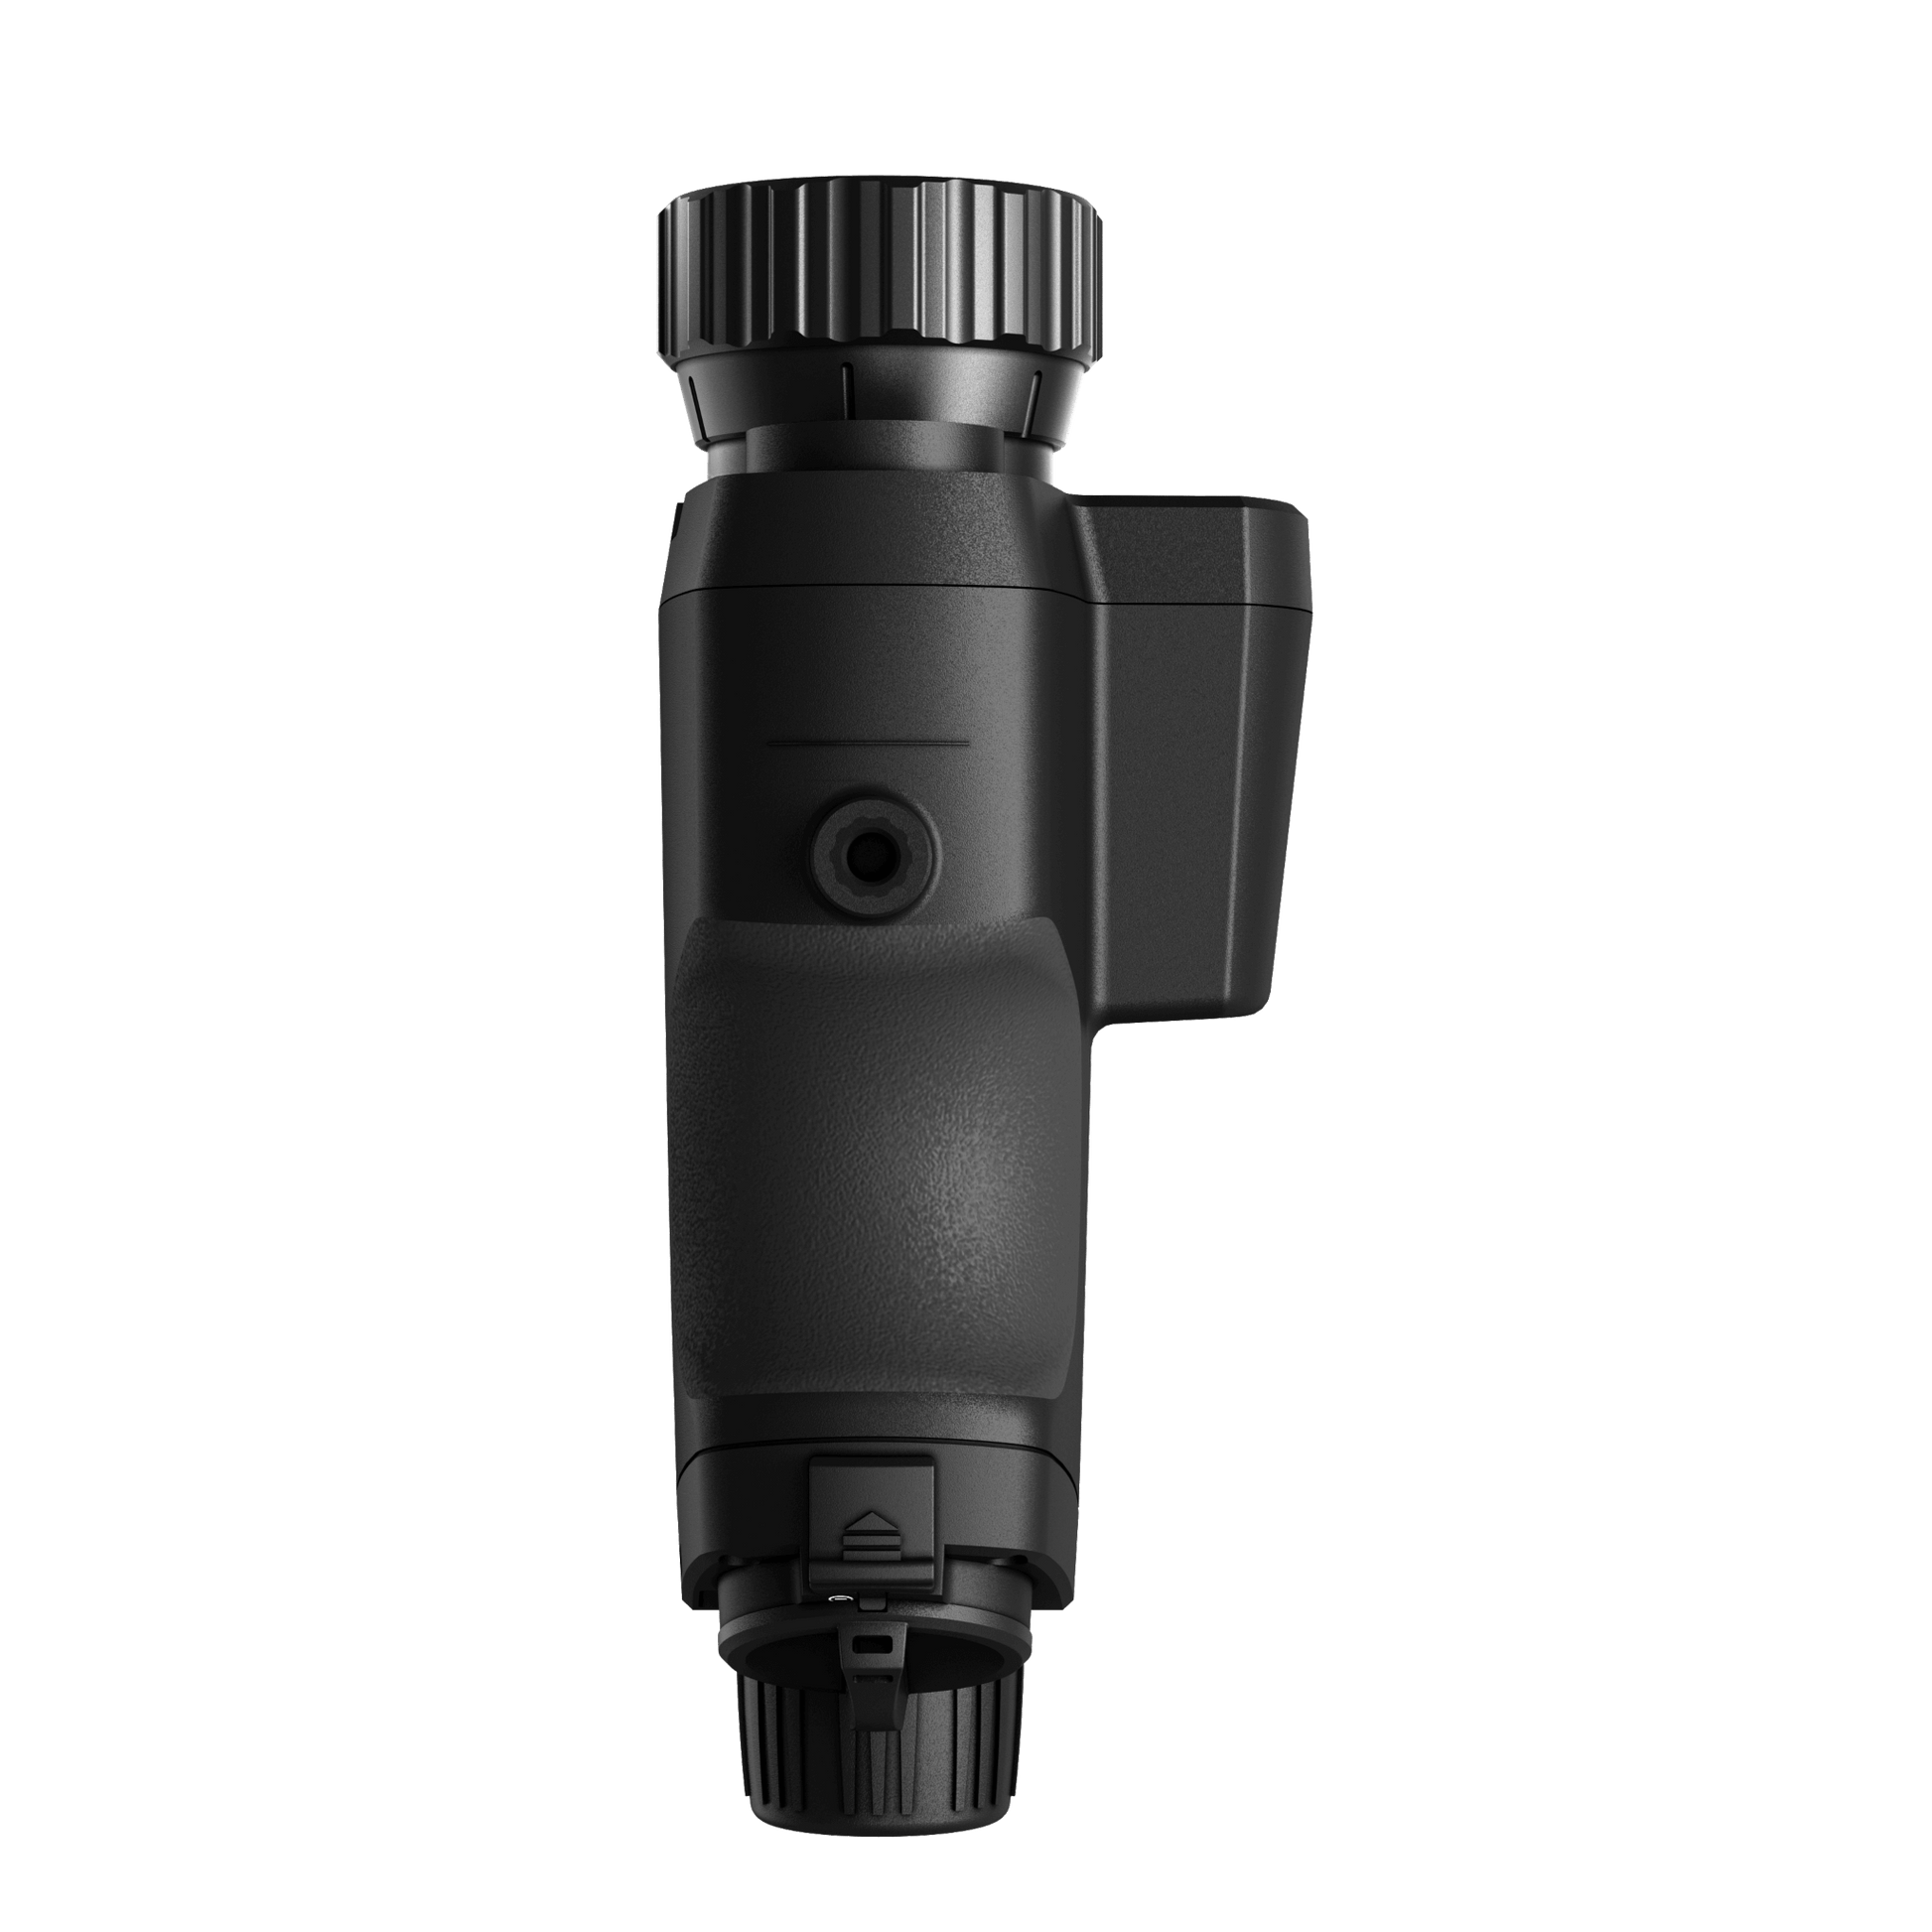 Cape Thermal imaging monocular for sale - HikMicro Gryphon GQ50L Handheld thermal monocular bottom view showing tripod mount